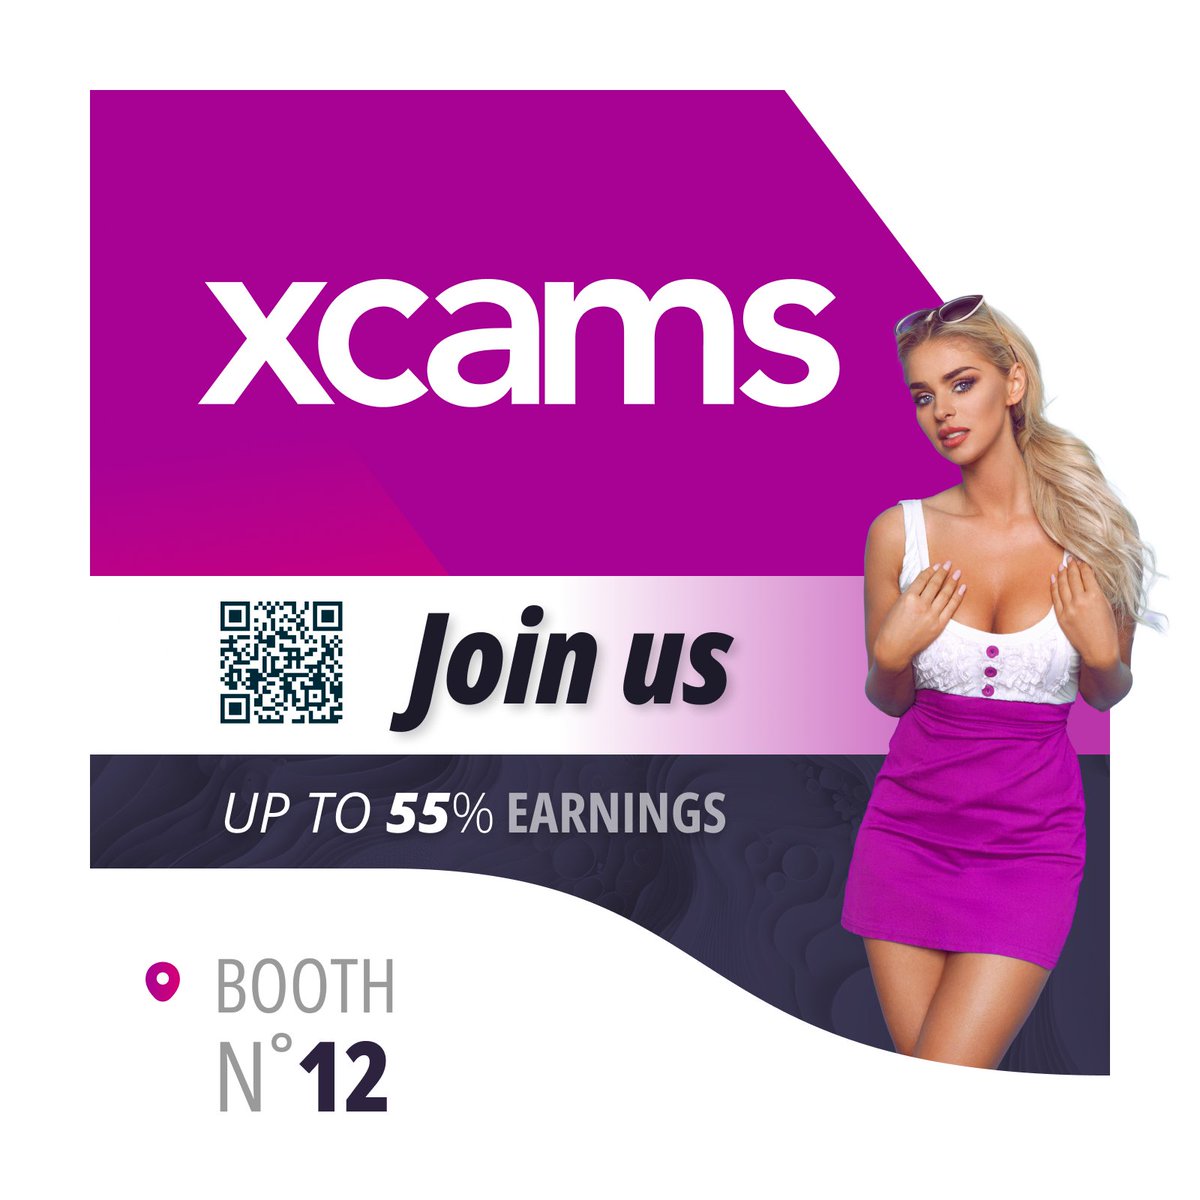 Spotlight's on Xcams, who's hitting the stage as a #BucharestSummit 2024 sponsor. 🎉

A leading streaming platform known for empowering its models, Xcams shows its commitment to the industry by offering up to 55% earnings. #streaming #streamingplatform #onlinebrand  #freemium